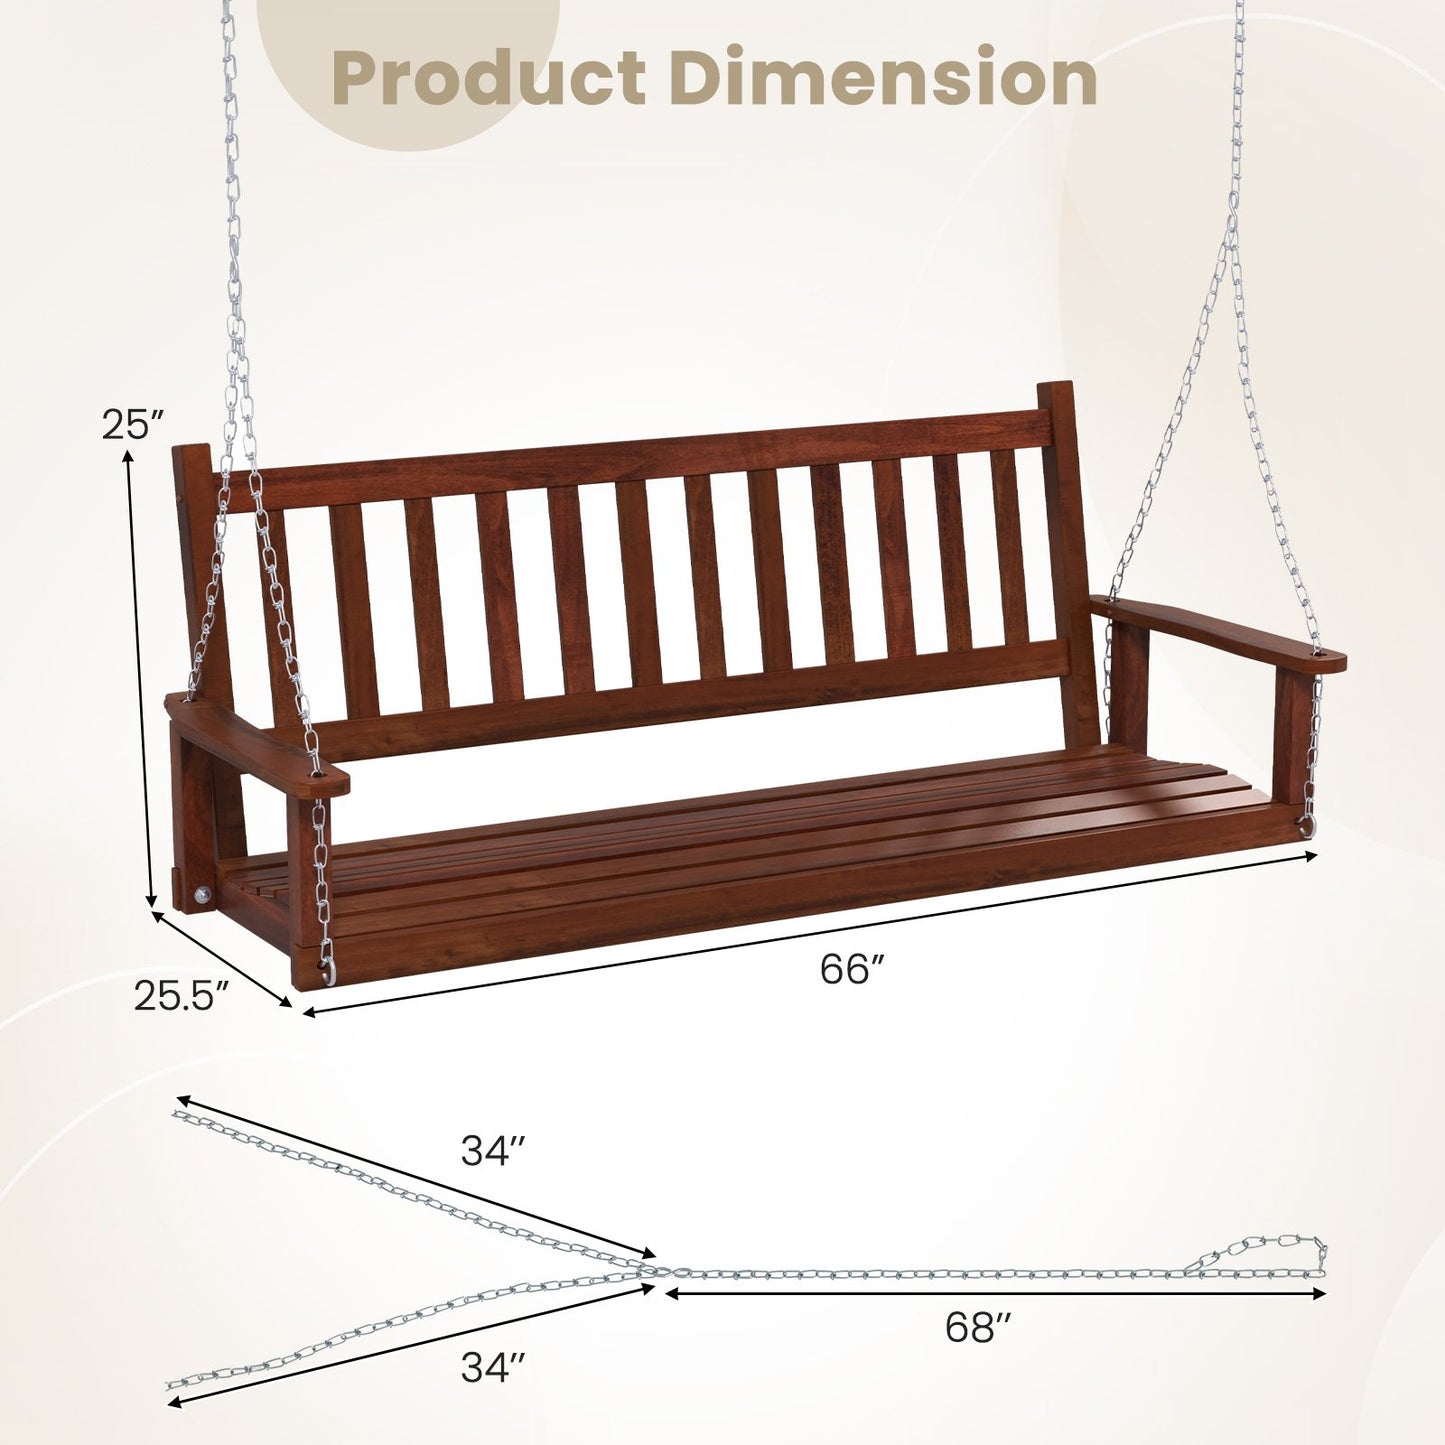 3-Person Wooden Outdoor Porch Swing with 800 lbs Weight Capacity, Brown